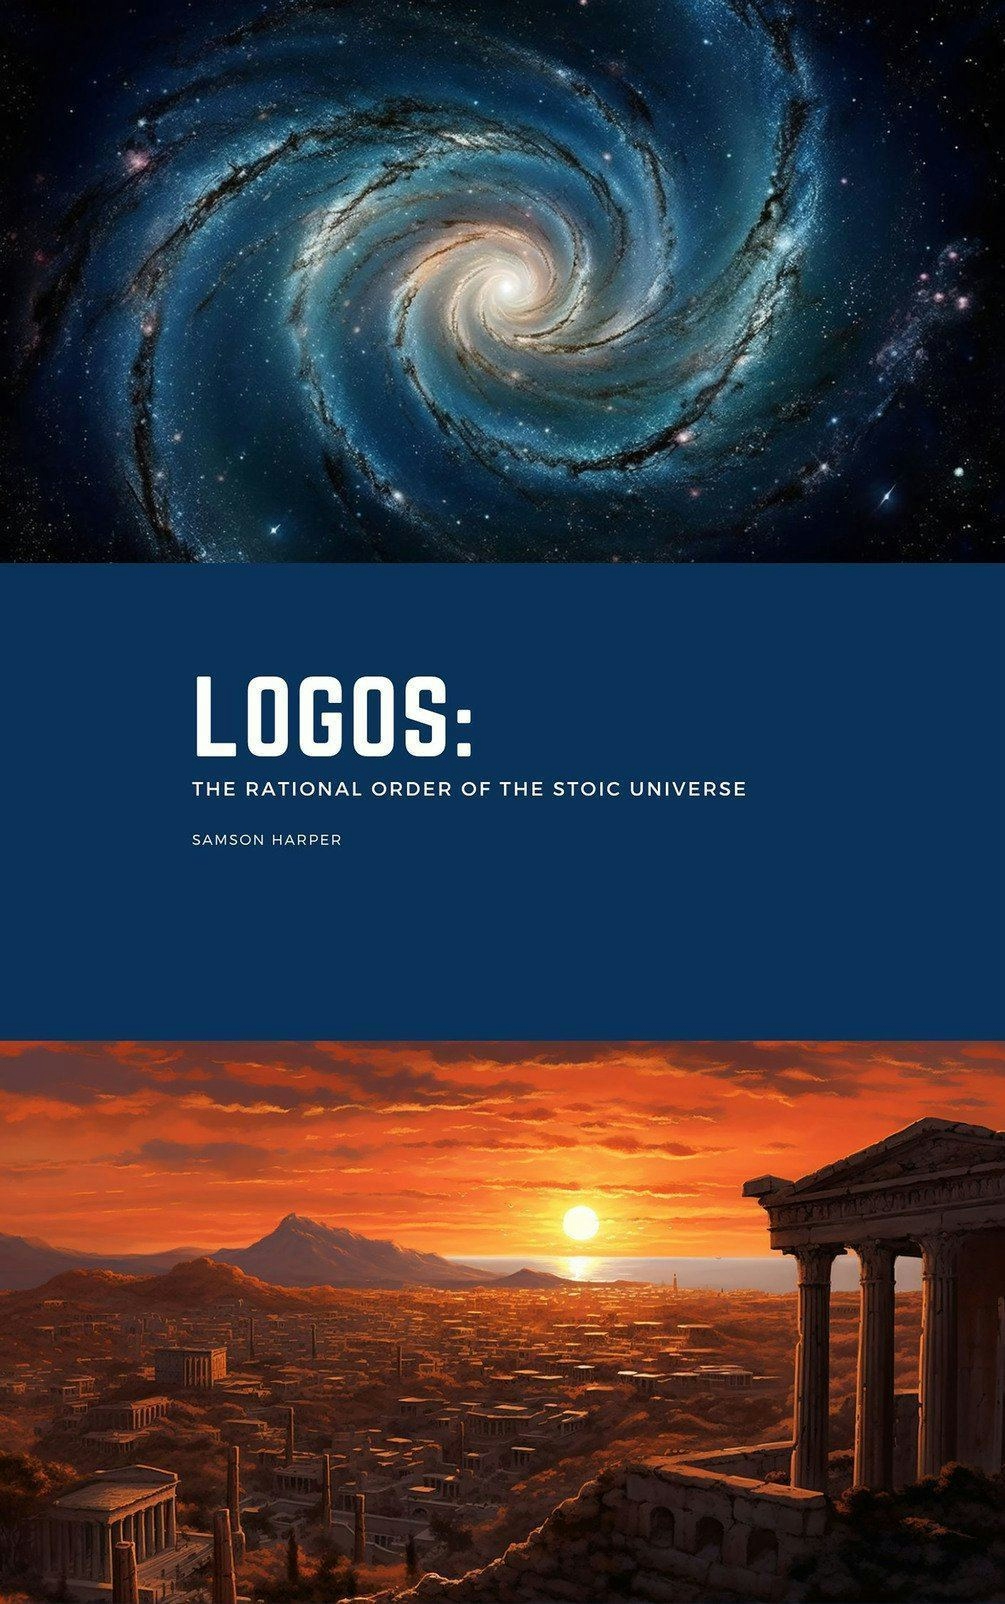 Logos: The Rational Order of the Stoic Universe